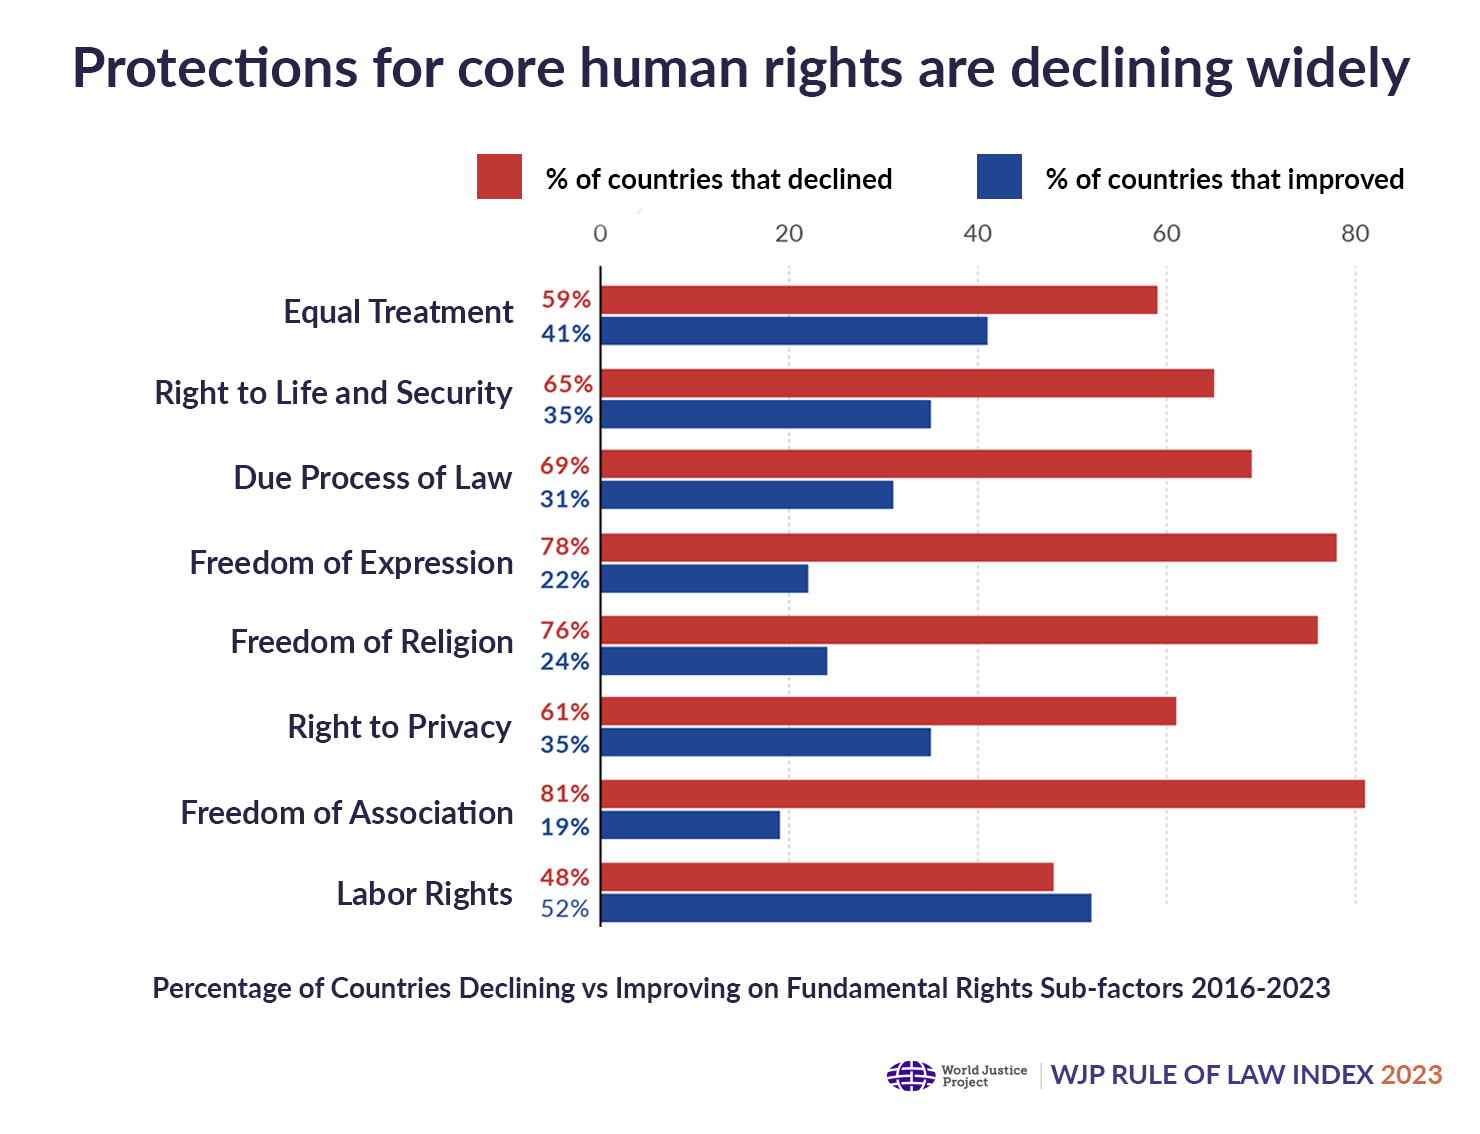 Protections for fundamental rights are declining widely 